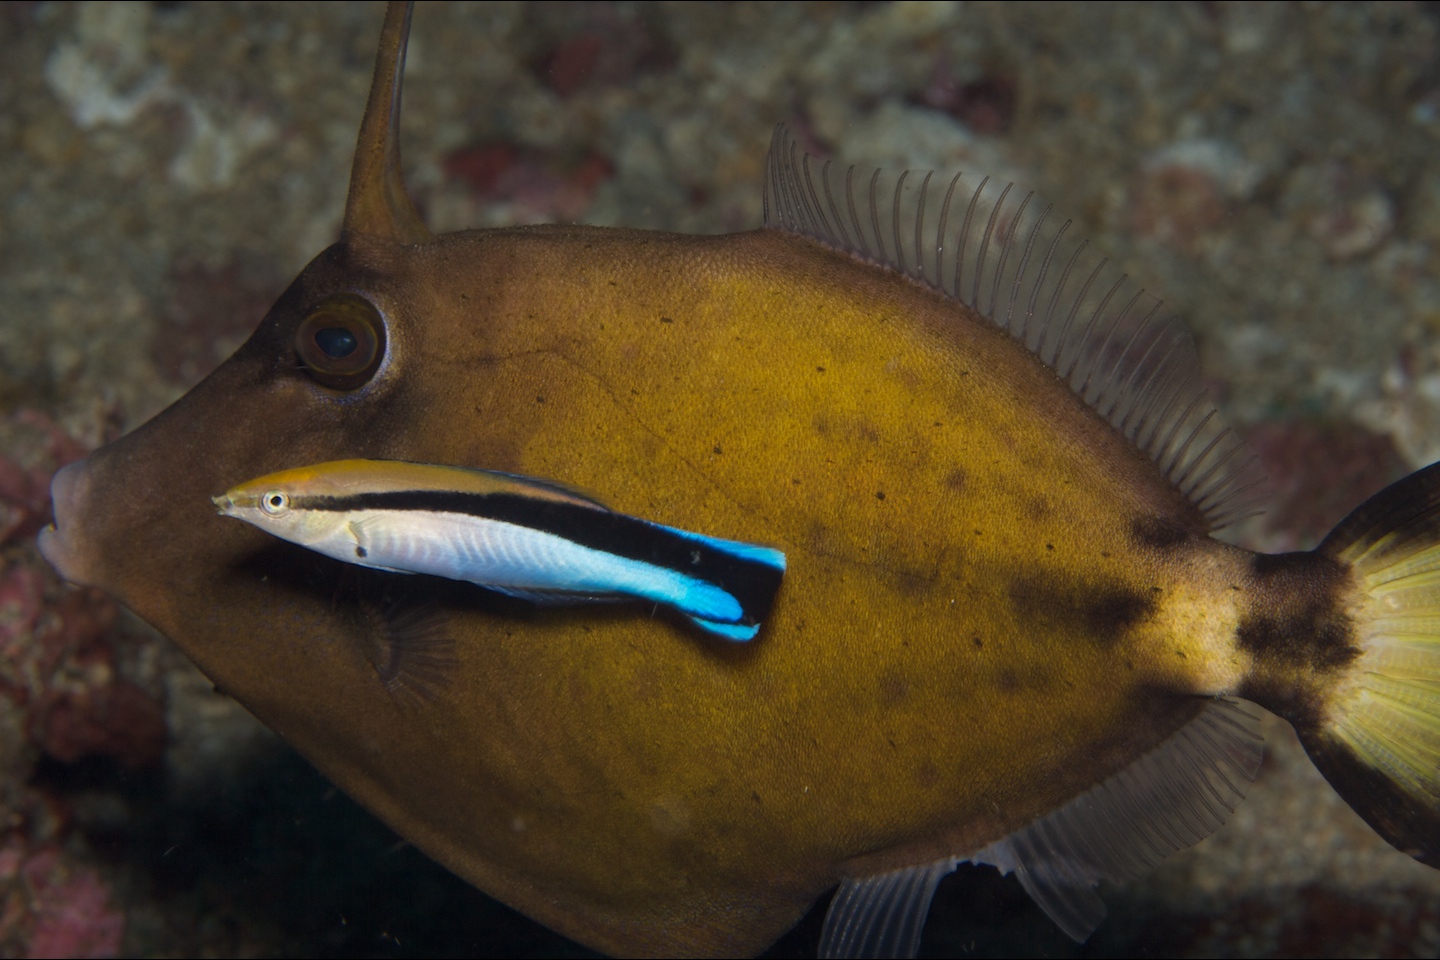 Spectacled filefish